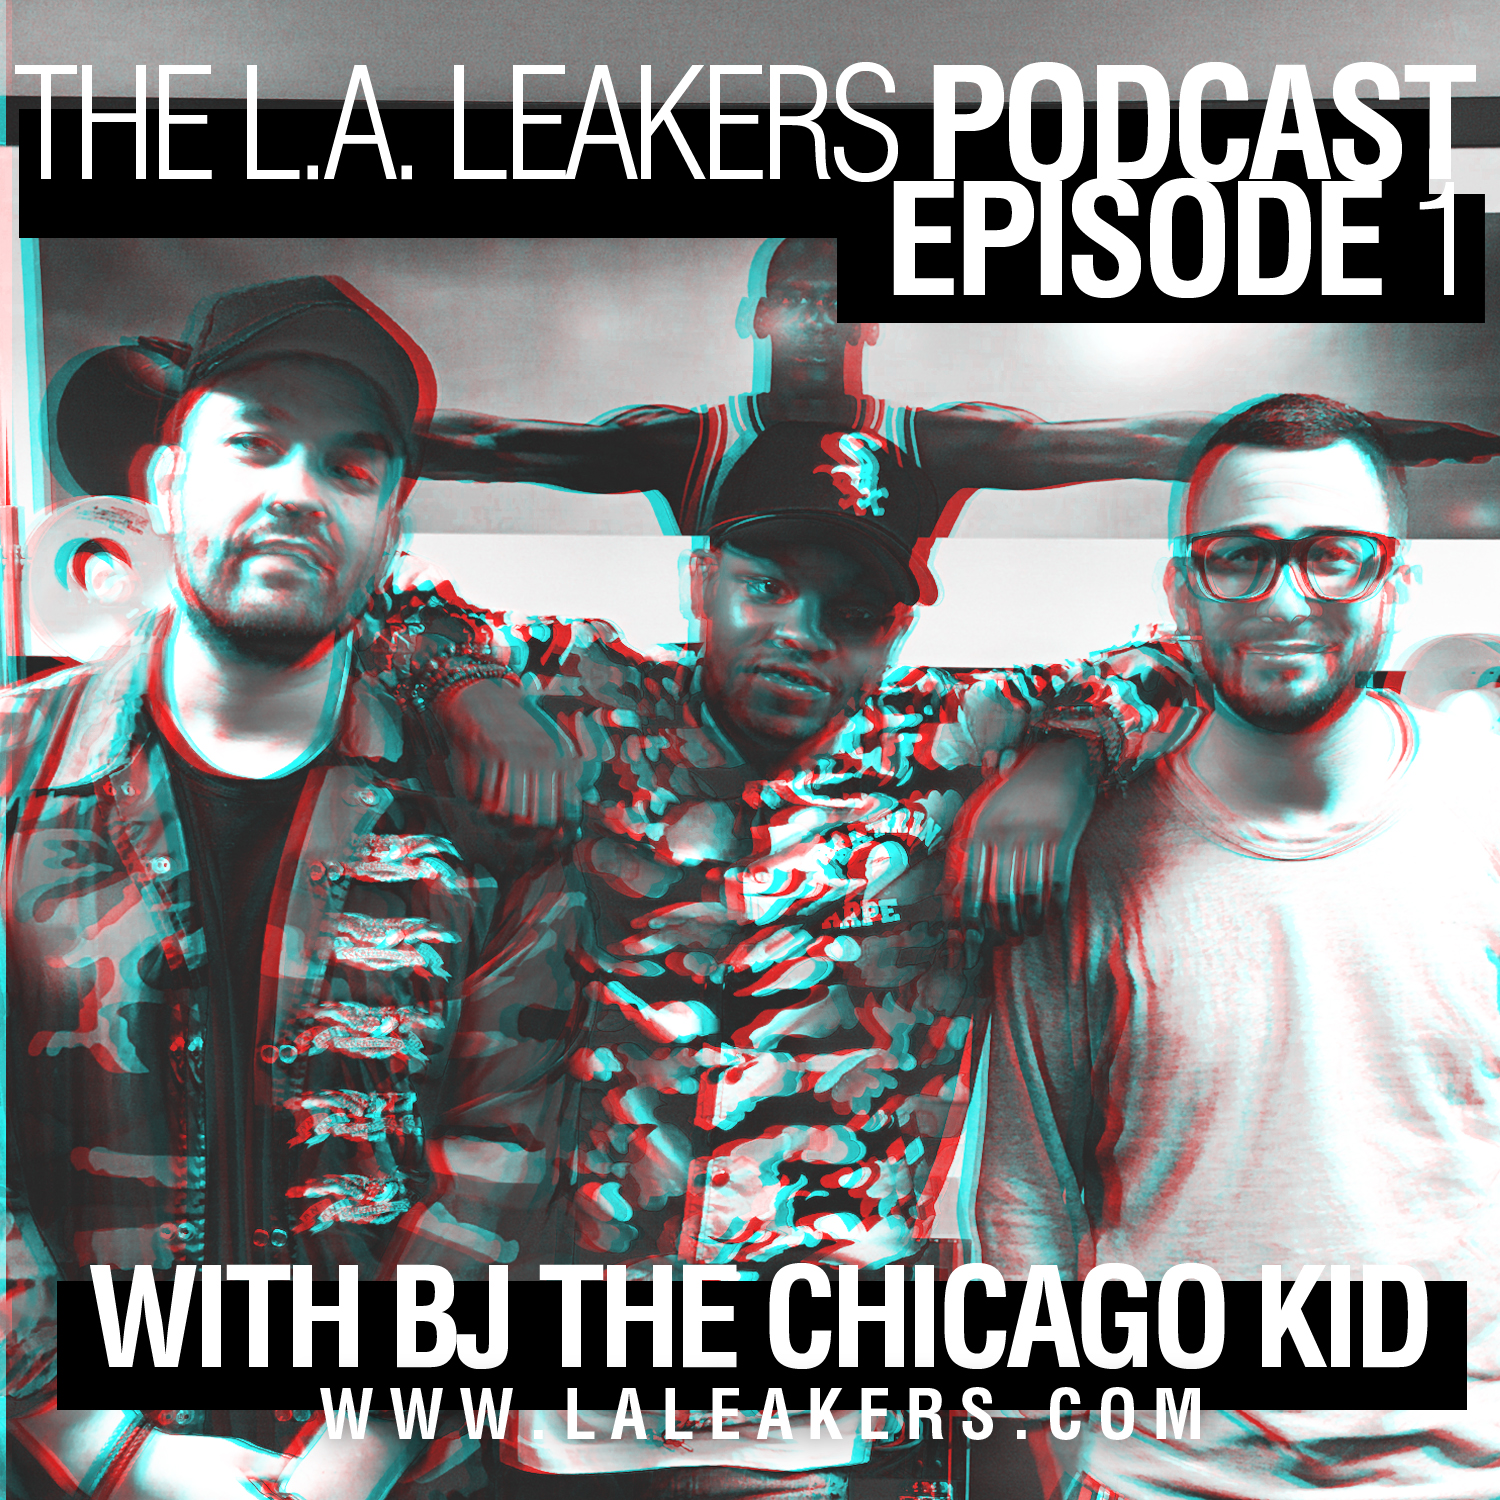 The L.A. Leakers Podcast Ep: 1 w/ BJ the Chicago Kid (Podcast)